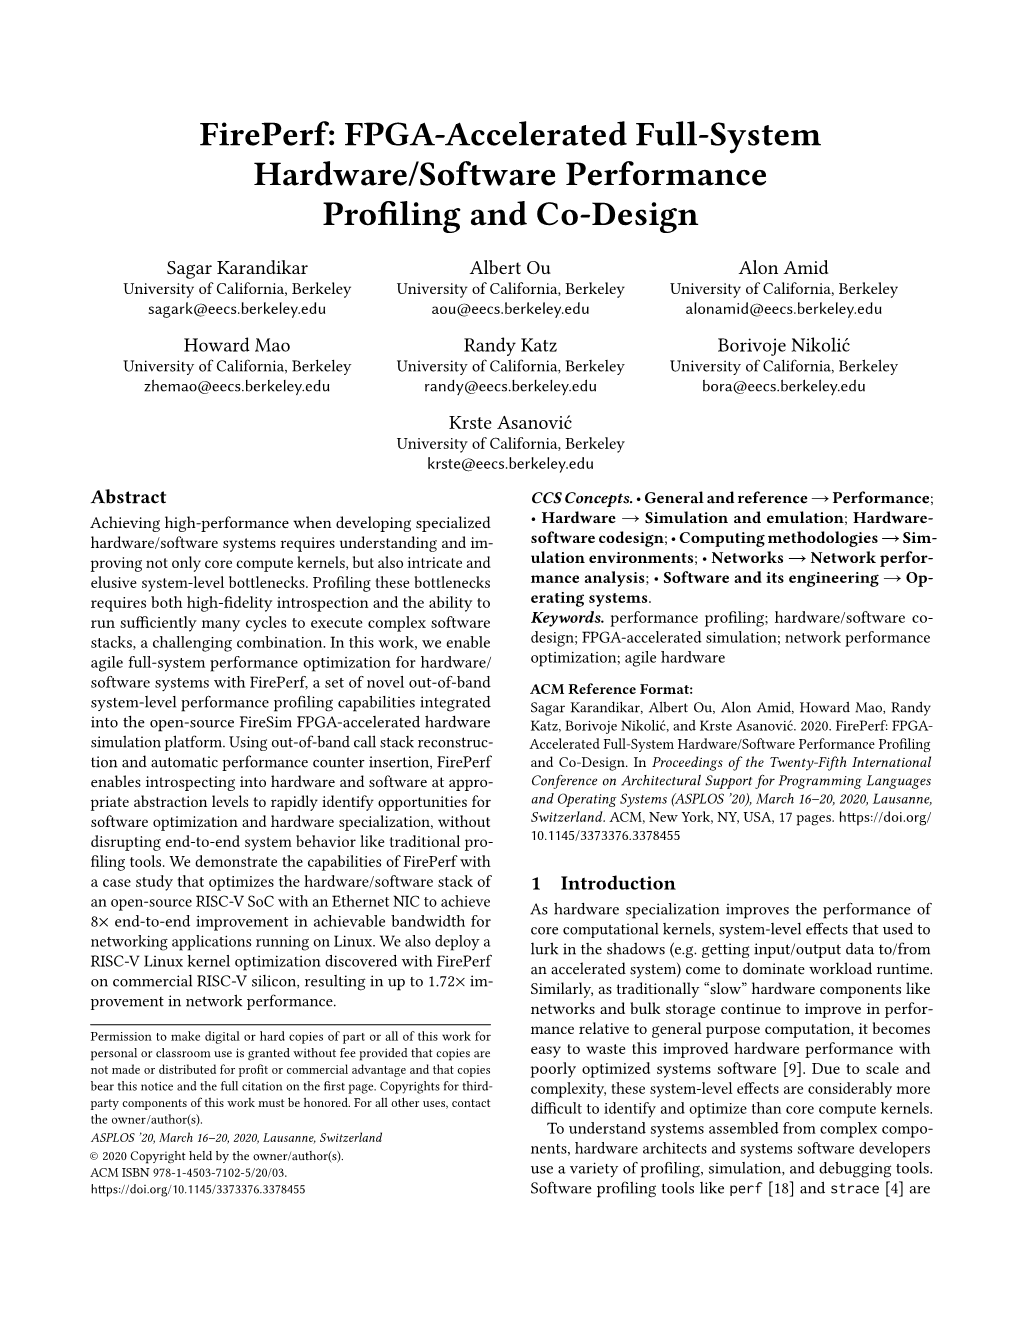 Fireperf: FPGA-Accelerated Full-System Hardware/Software Performance Profiling and Co-Design